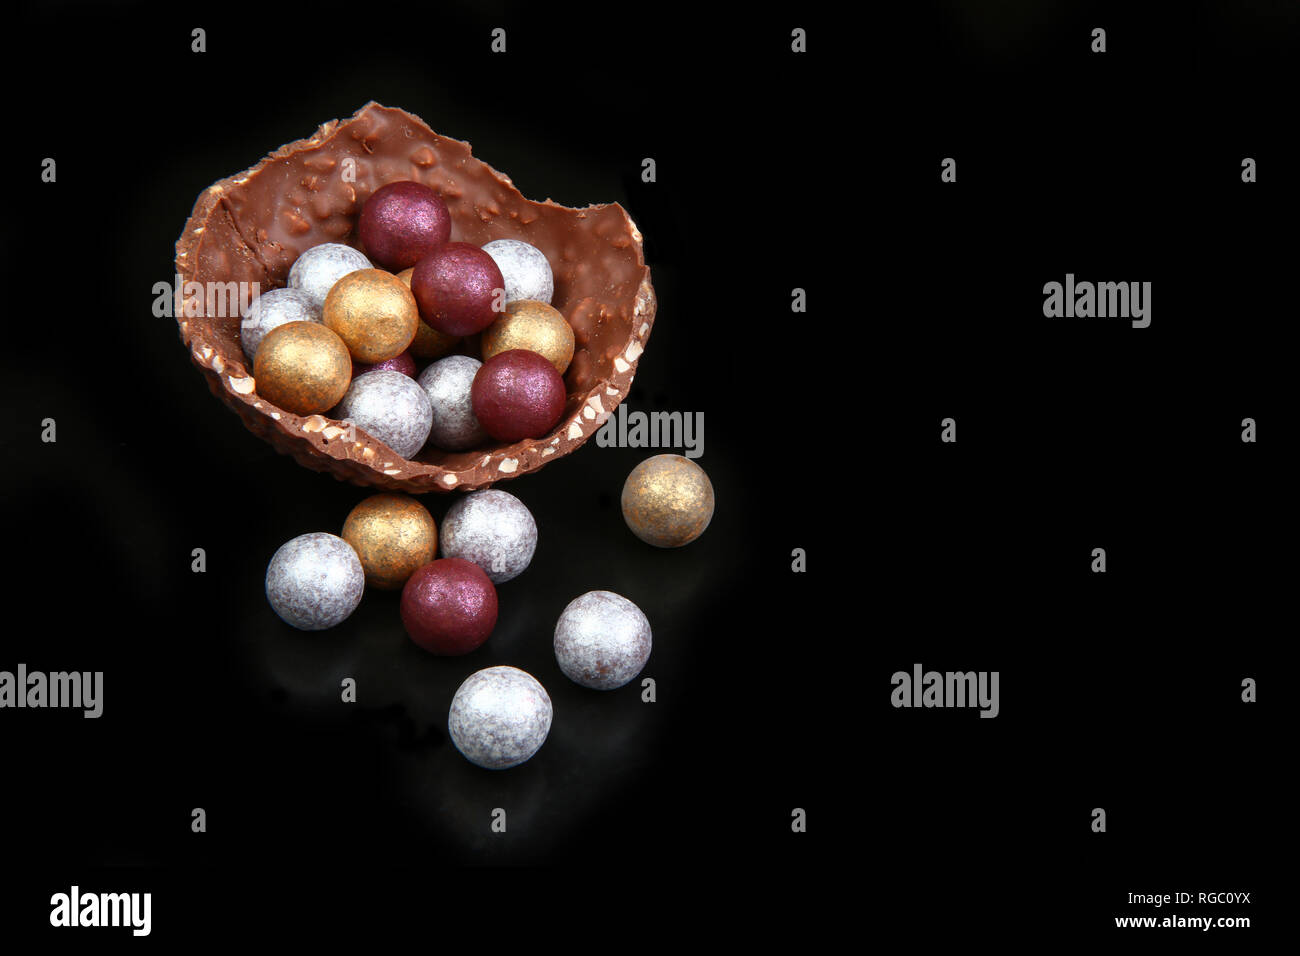 Modern sophistocated chocolate gold, silver & broze easter eggs, against a black background. Stock Photo